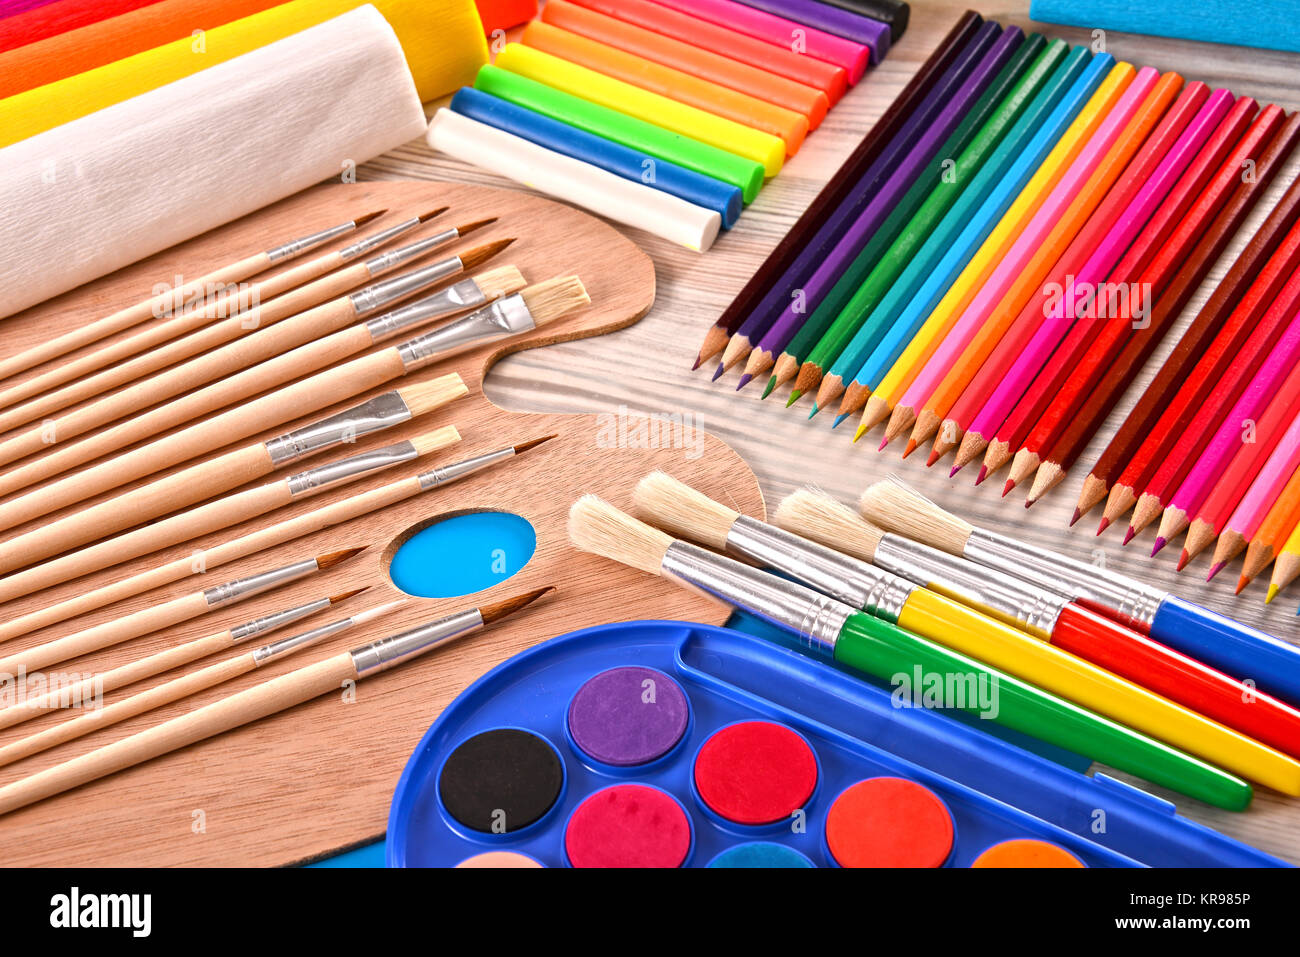 https://c8.alamy.com/comp/KR985P/composition-with-school-accessories-for-painting-and-drawing-KR985P.jpg